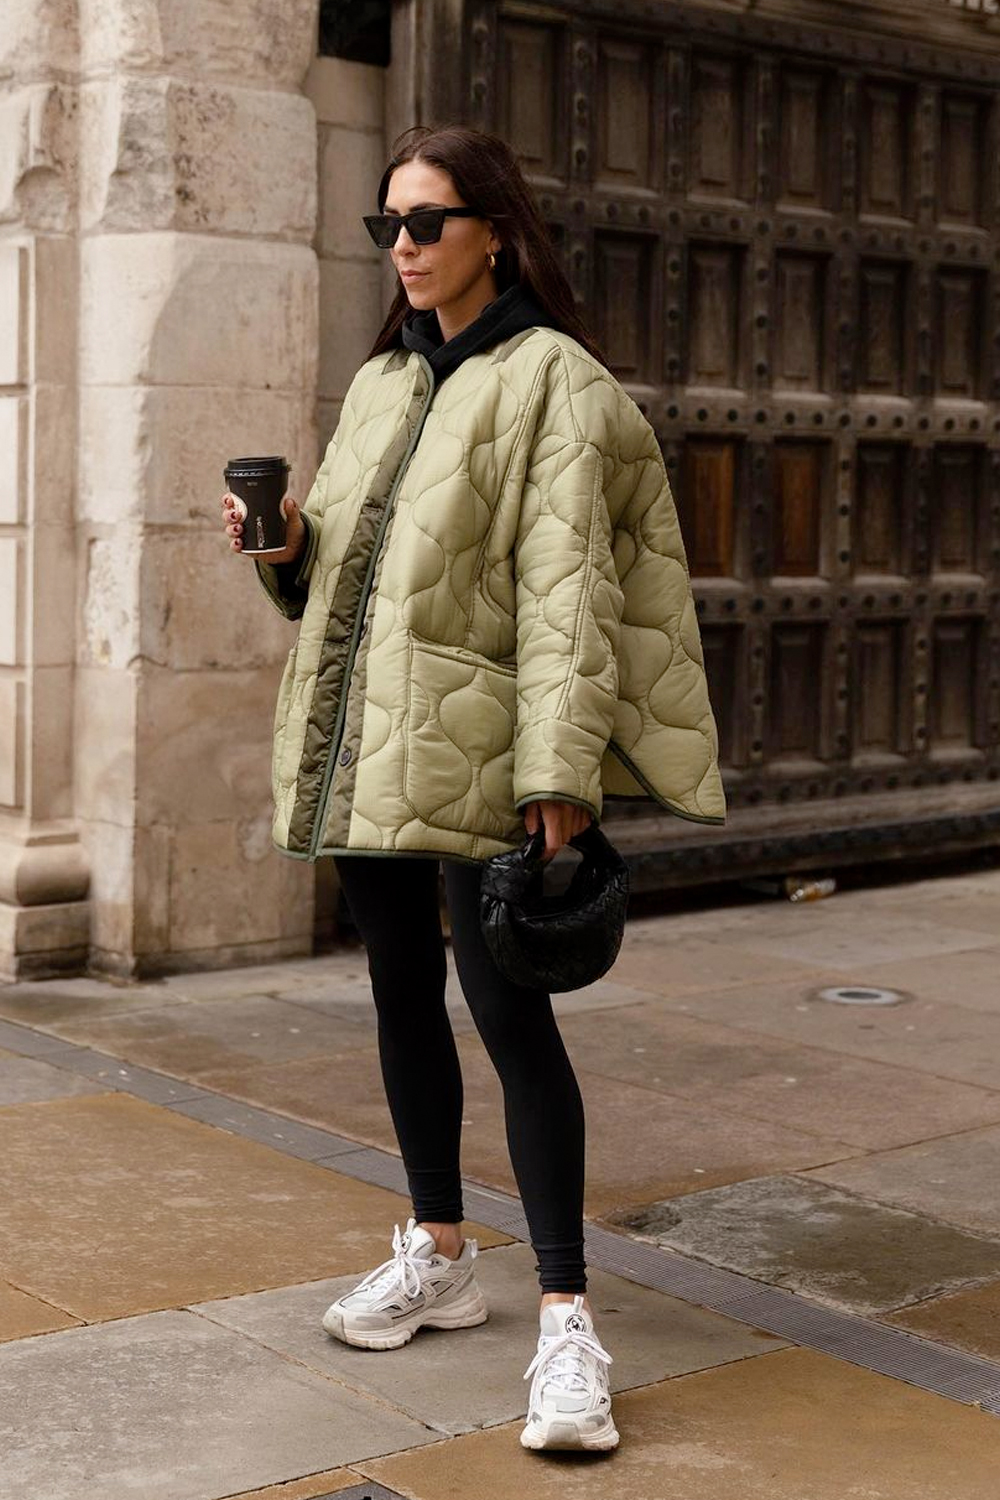 The Frankie Shop’s Quilted Jacket Is Already Winter’s Outwear Success Story